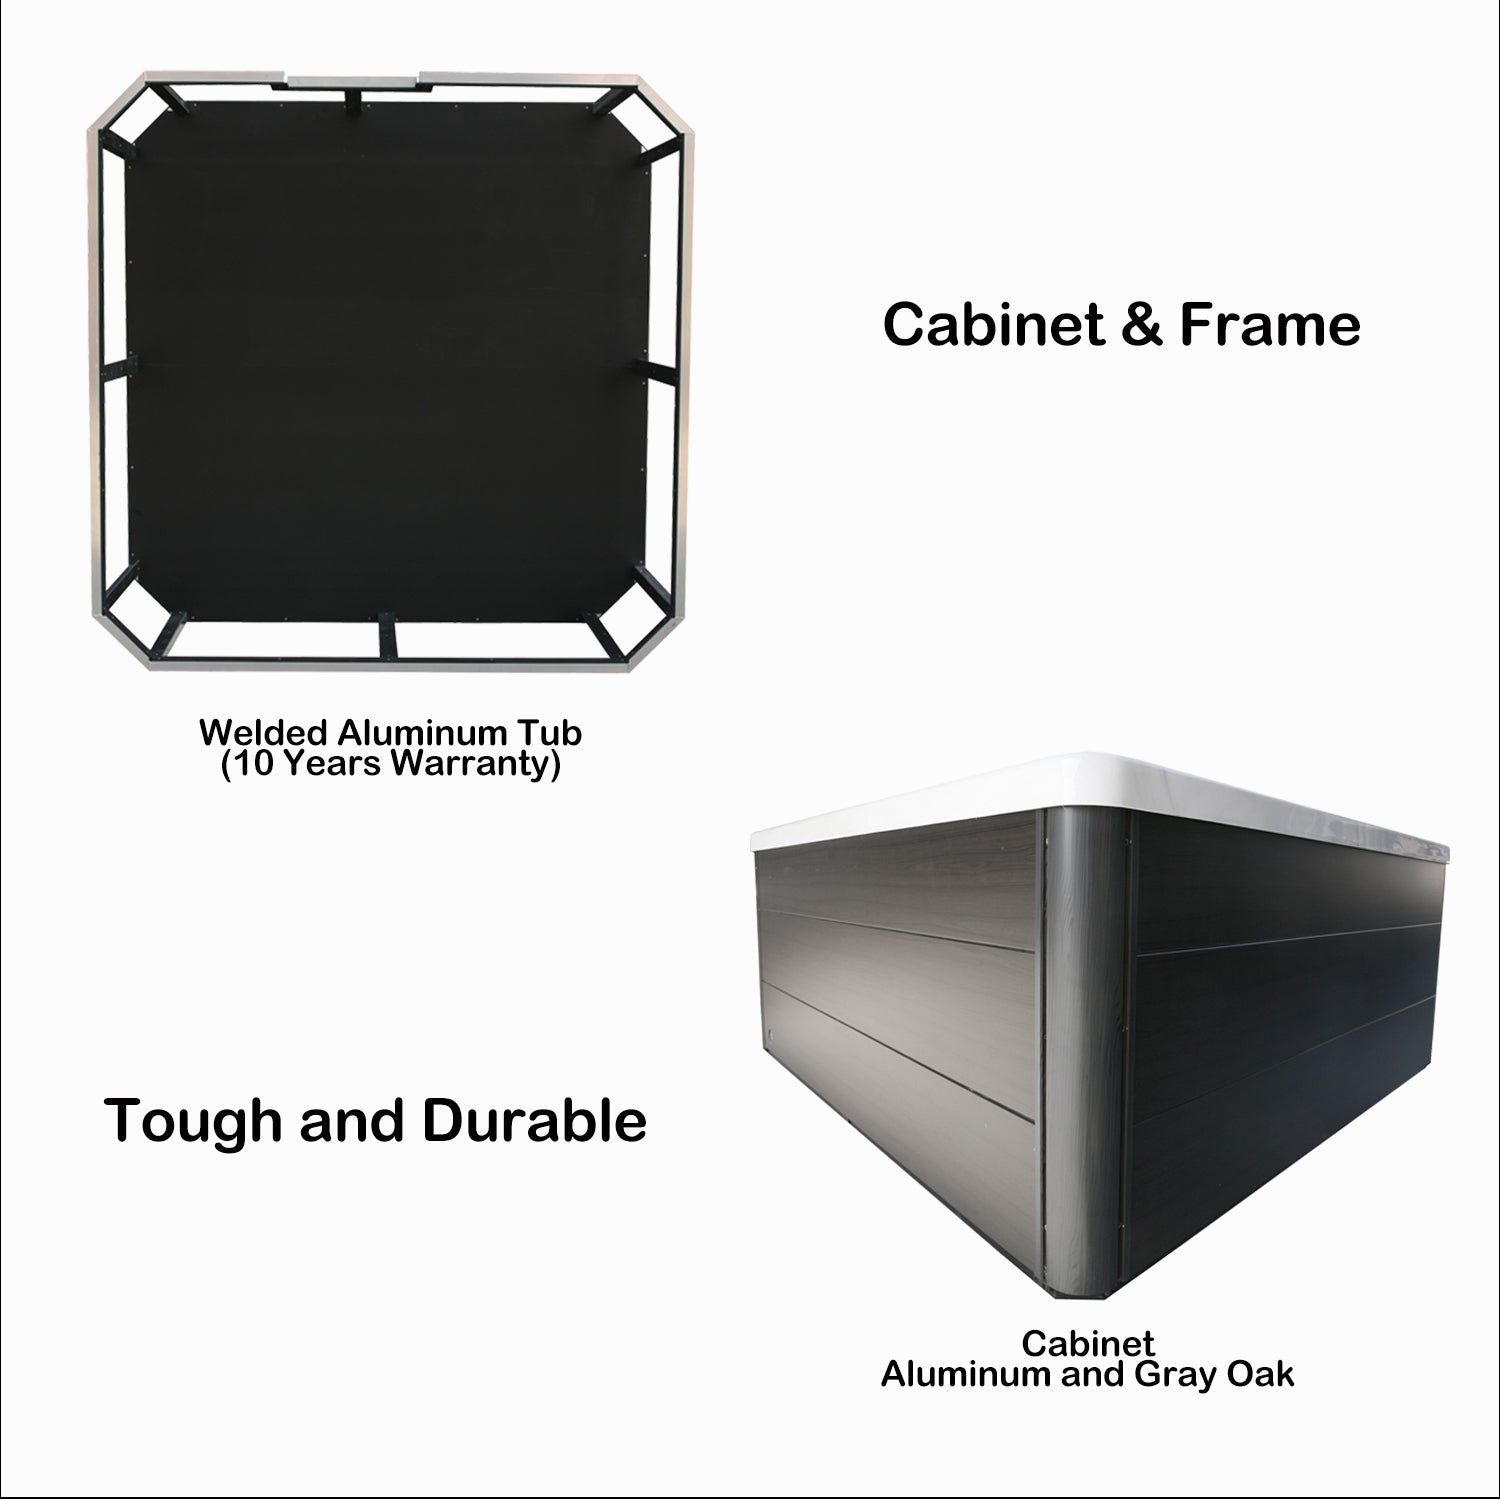 Lyra I cabinet and frame made of welded aluminum, 10 years warranty, tough and durable